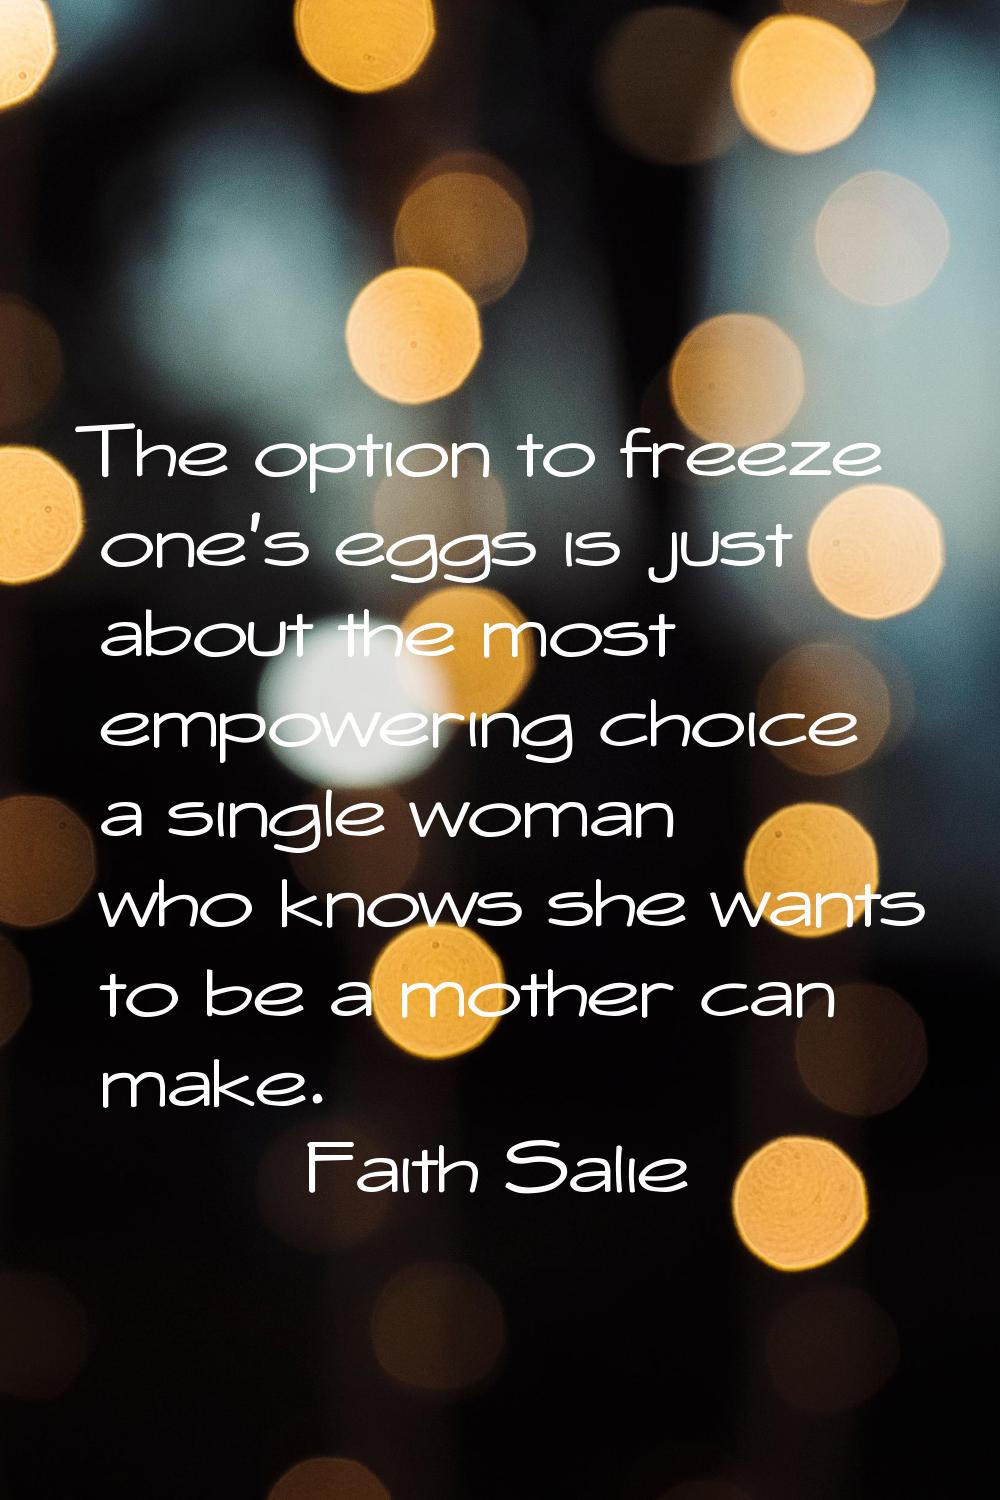 The option to freeze one's eggs is just about the most empowering choice a single woman who knows s